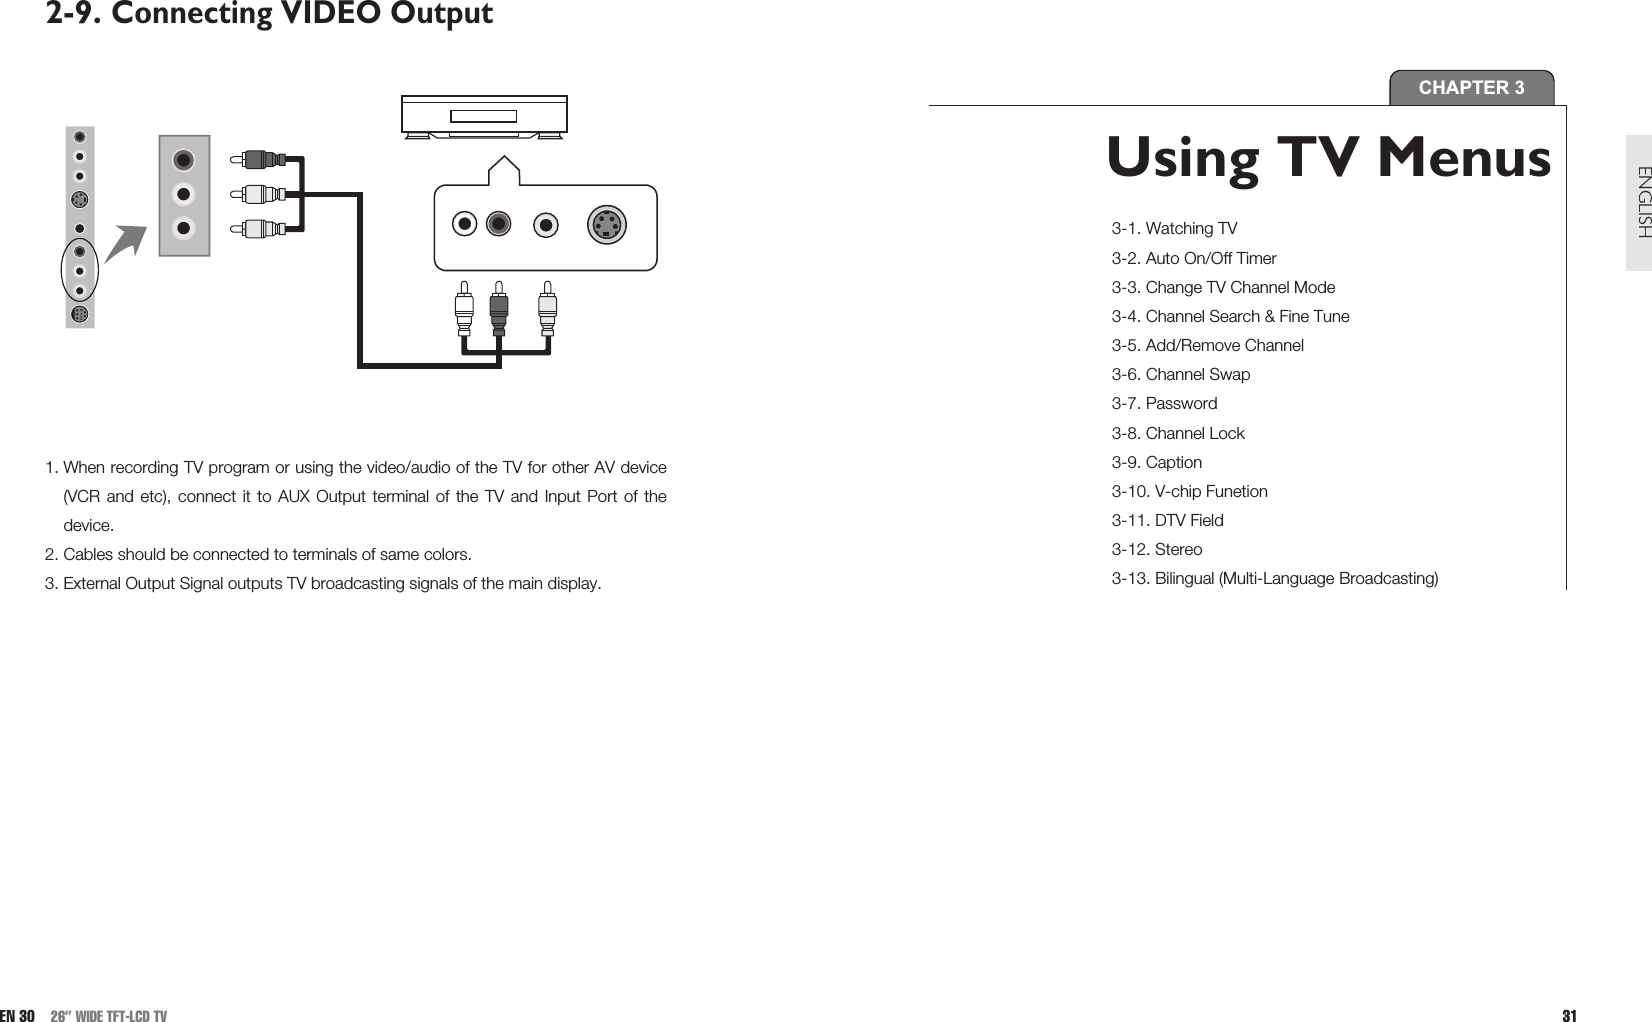 31ENGLISH2-9. Connecting VIDEO Output1. When recording TV program or using the video/audio of the TV for other AV device(VCR and etc), connect it to AUX Output terminal of the TV and Input Port of thedevice.2. Cables should be connected to terminals of same colors.3. External Output Signal outputs TV broadcasting signals of the main display.EN 30 26” WIDE TFT-LCD TVCHAPTER 3Using TV Menus 3-1. Watching TV3-2. Auto On/Off Timer3-3. Change TV Channel Mode3-4. Channel Search &amp; Fine Tune3-5. Add/Remove Channel3-6. Channel Swap3-7. Password3-8. Channel Lock3-9. Caption3-10. V-chip Funetion3-11. DTV Field3-12. Stereo3-13. Bilingual (Multi-Language Broadcasting)